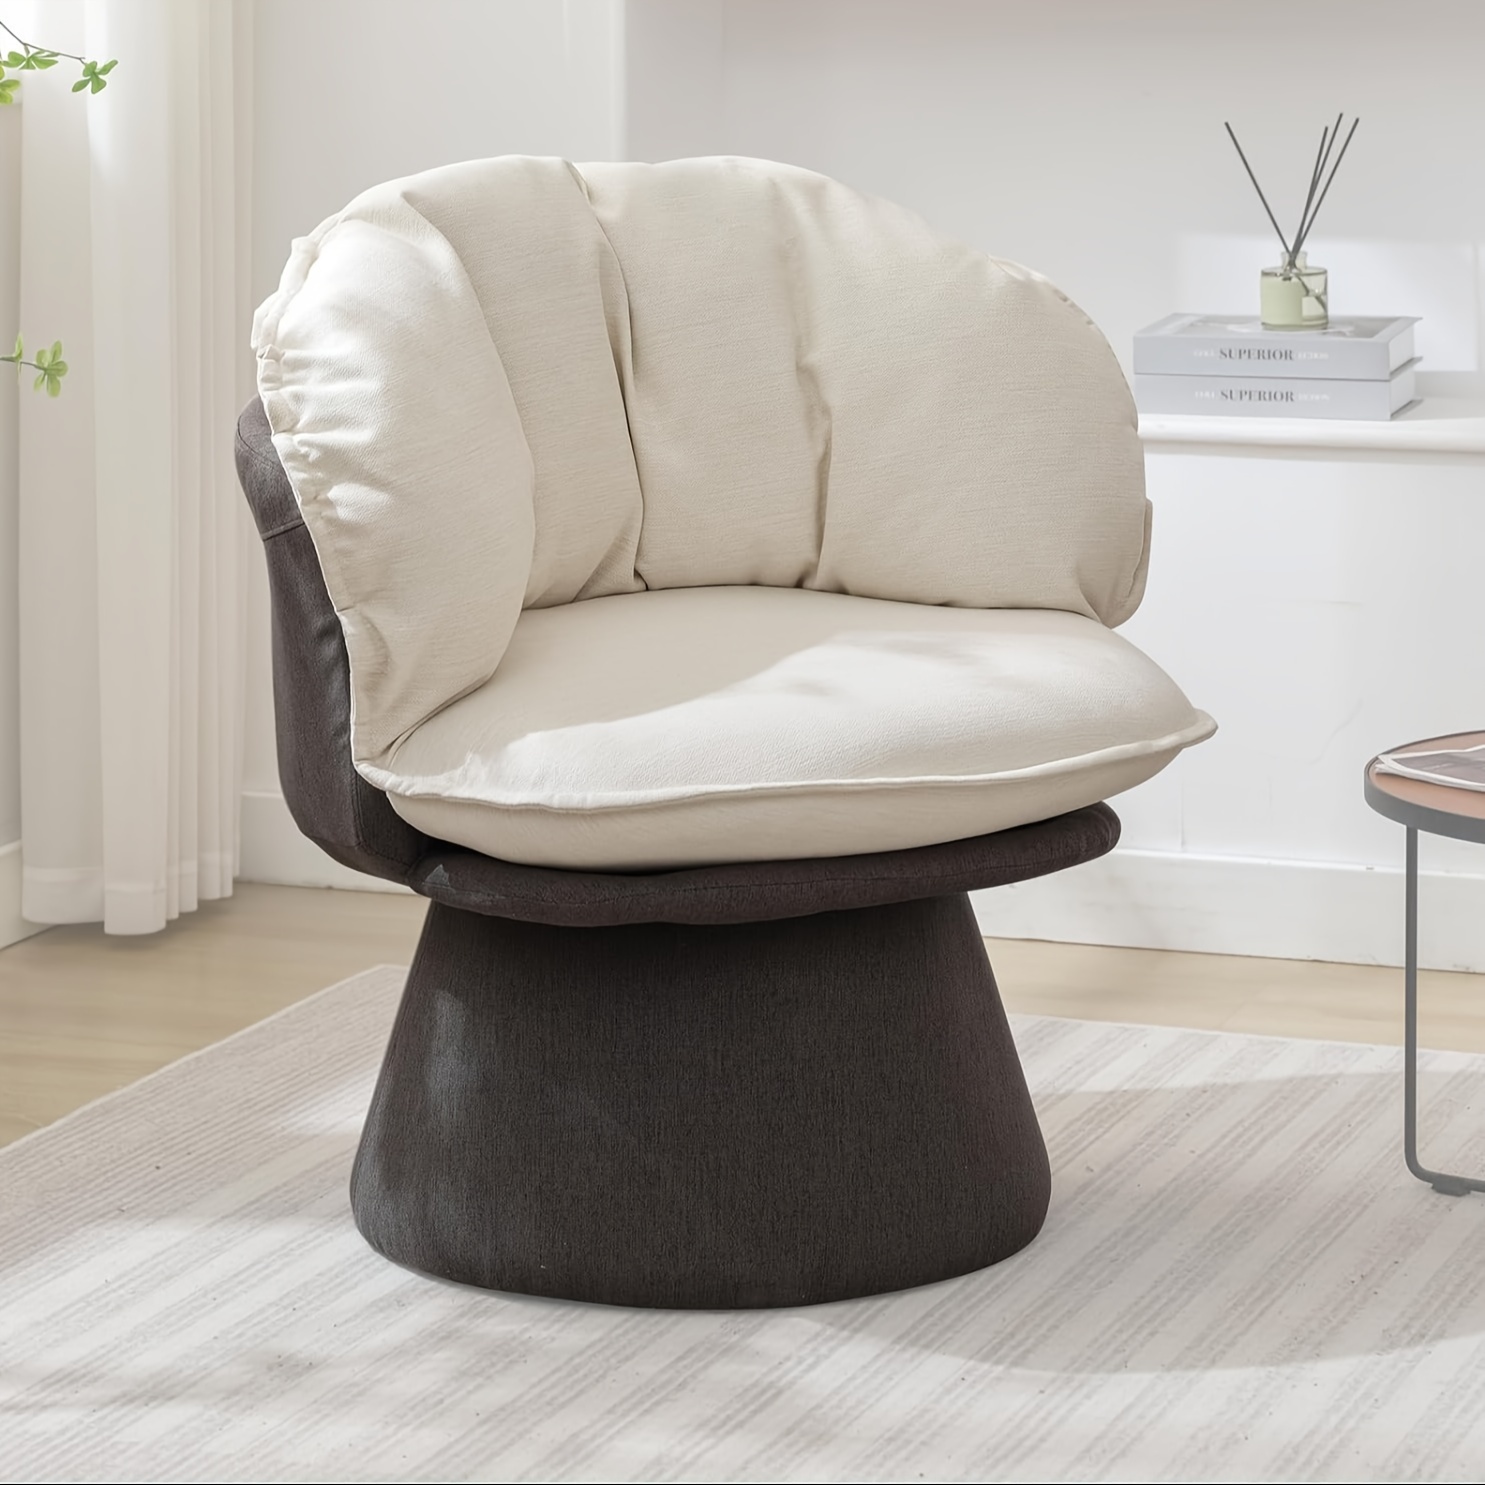 

Swivel Accent Chair, Armless Chairs Swivel Round Chair Upholstered Comfy 360 Degree Swivel Chair For Living Room, Swivel Barrel Chair With Removable Cushion